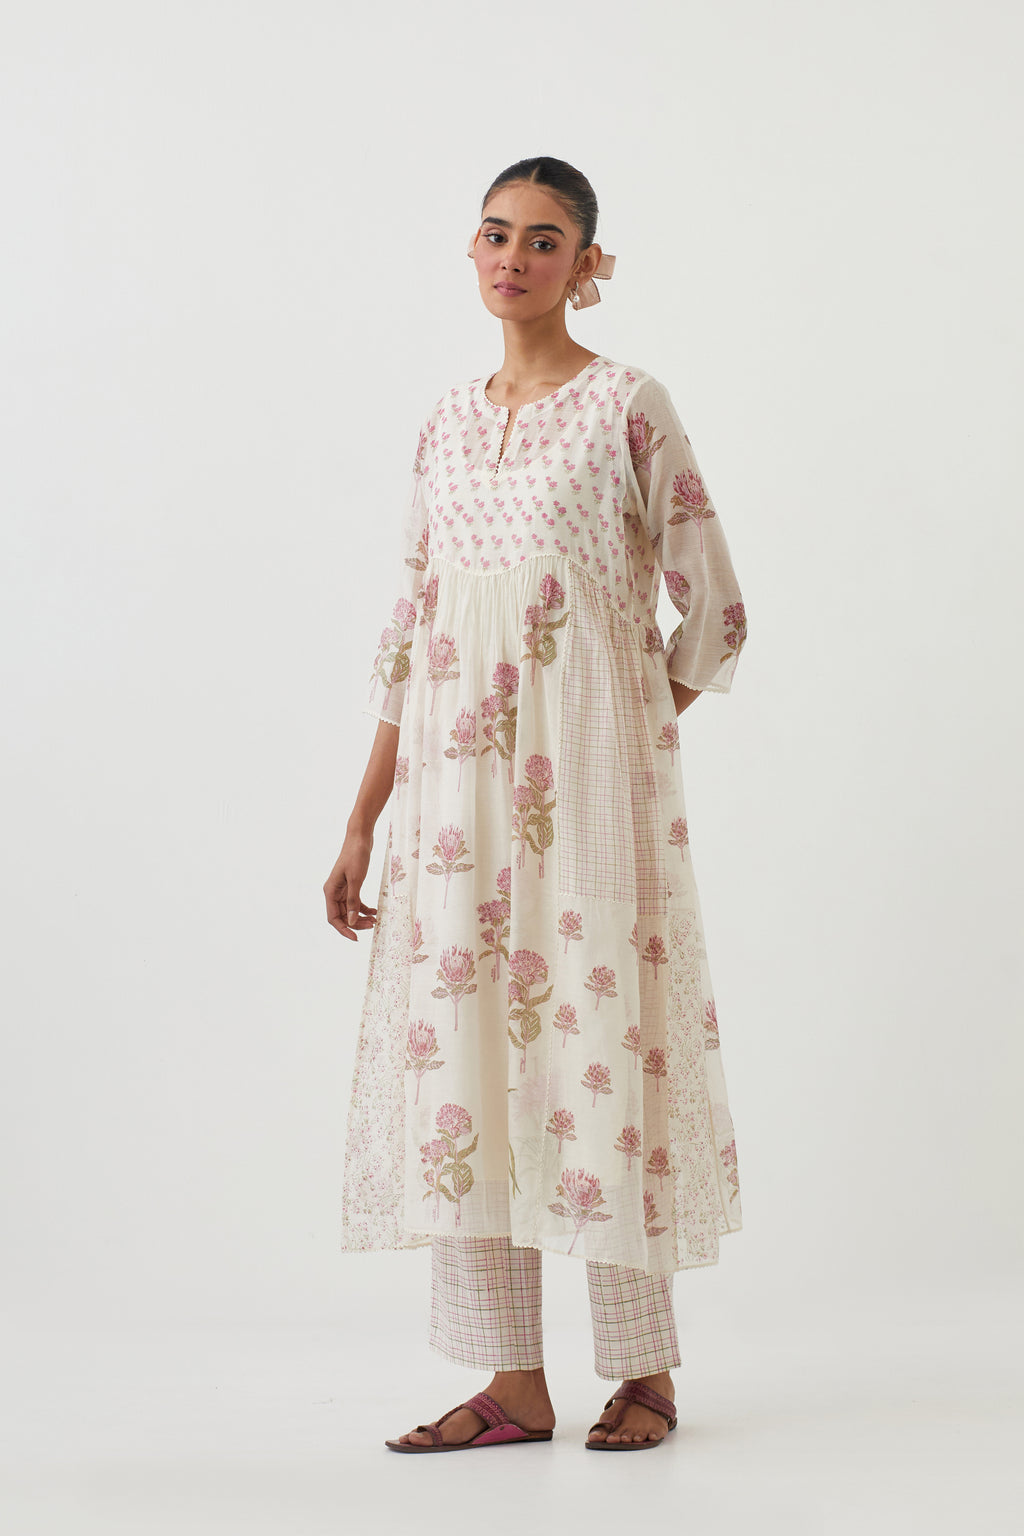 Off white cotton chanderi Kurta dress set  with all-over assorted pink colored floral hand block print.